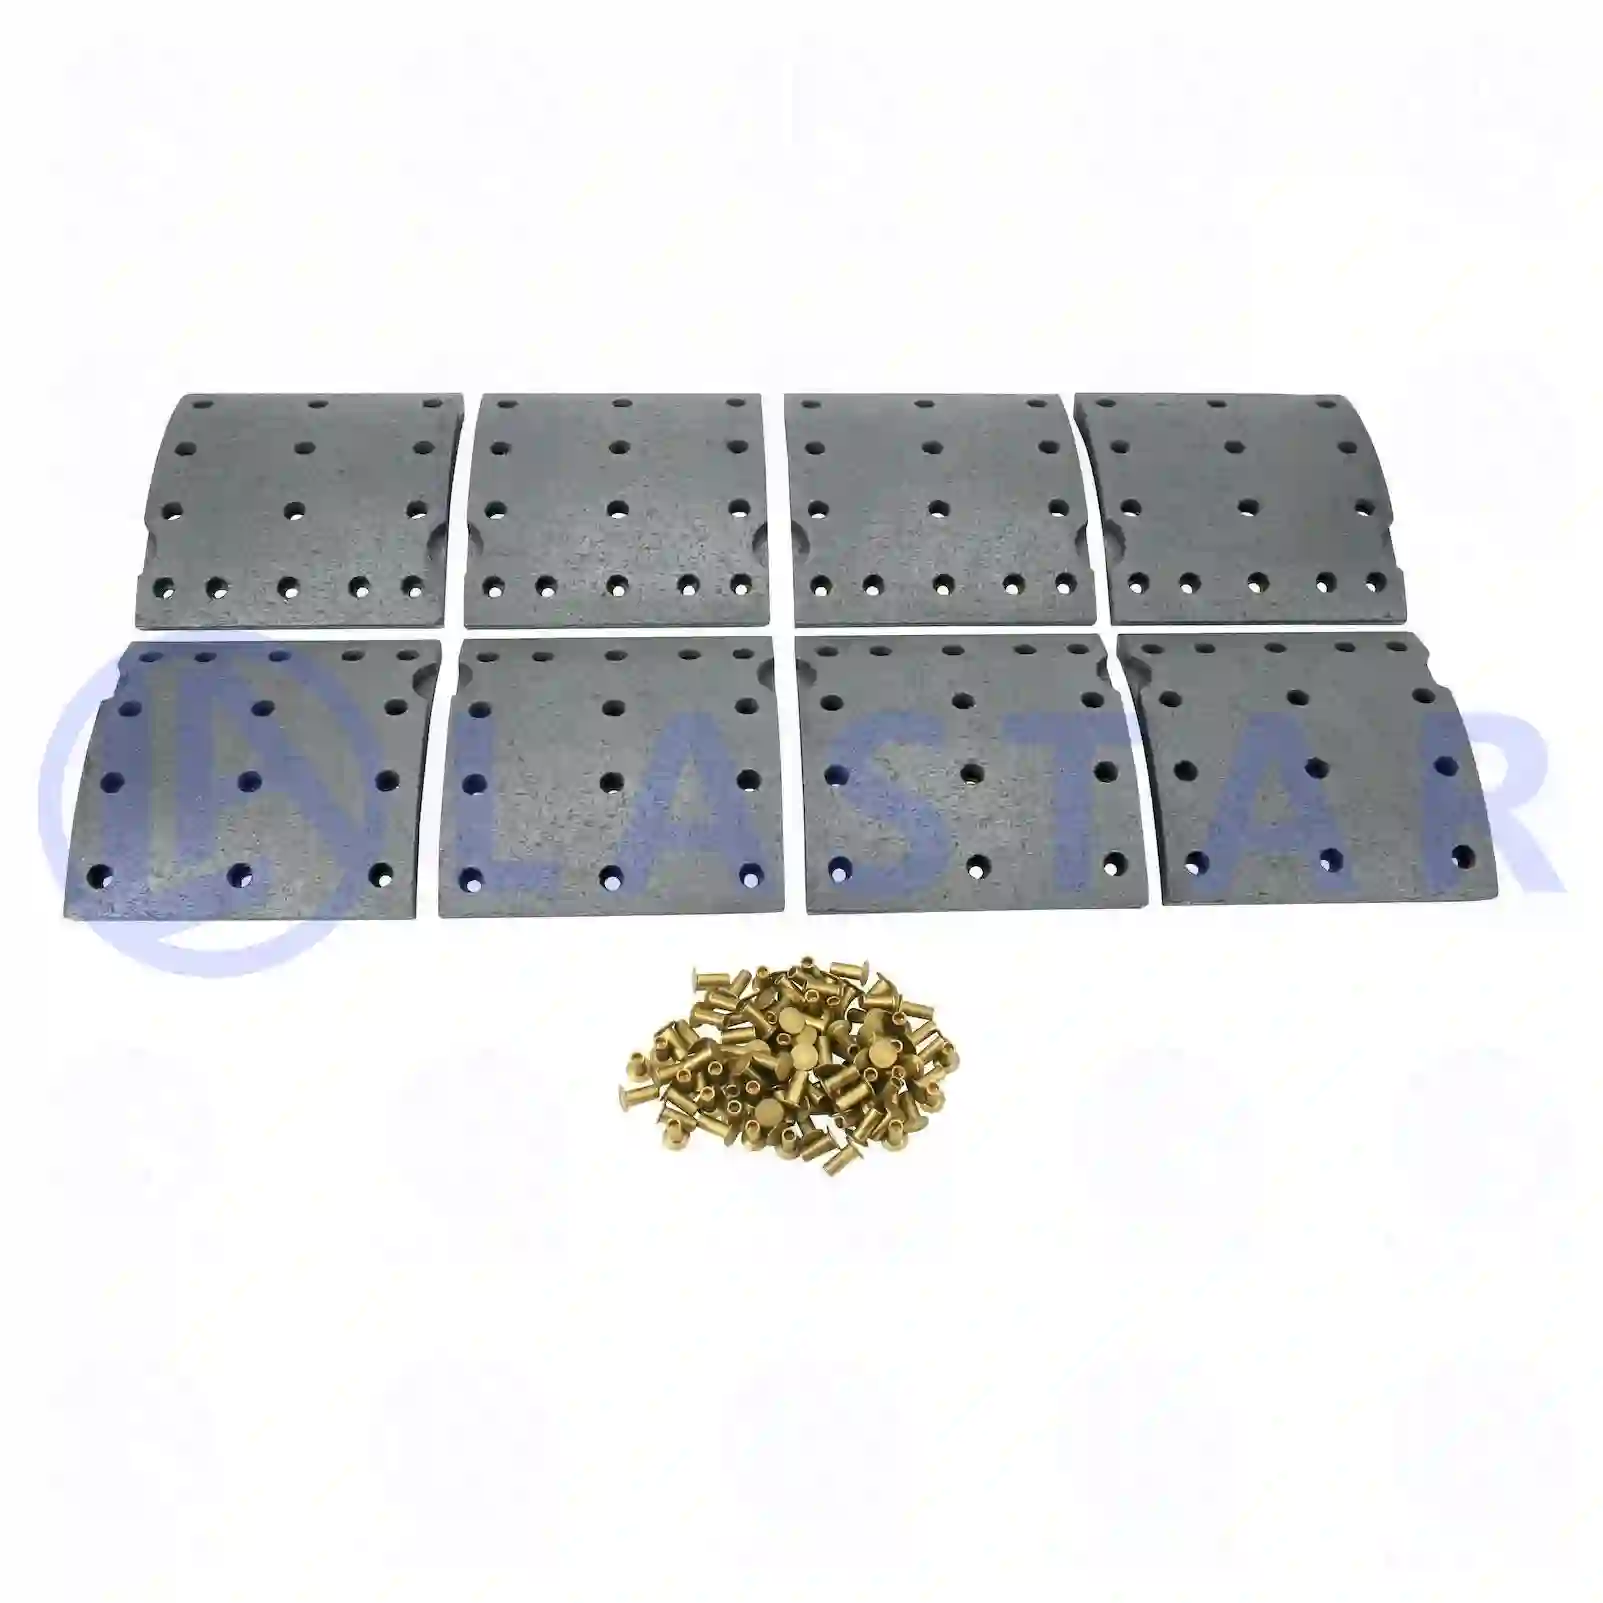 Drum brake lining kit, axle kit, 77717433, 5001868087, 7421534374, MBLK1180, 21534097, 21534097S, 270518, 270518S, 270834, 270834S, 2708345, 270940, 270940S, 2709400, 270974, 270974S, 2709749, 275994, 275994S, 3090347, 3090347S, 3091456, 3091456S, 3095167, 3095167S, 3095177, 3095177S, 3095187, 3095187S, ZG50448-0008 ||  77717433 Lastar Spare Part | Truck Spare Parts, Auotomotive Spare Parts Drum brake lining kit, axle kit, 77717433, 5001868087, 7421534374, MBLK1180, 21534097, 21534097S, 270518, 270518S, 270834, 270834S, 2708345, 270940, 270940S, 2709400, 270974, 270974S, 2709749, 275994, 275994S, 3090347, 3090347S, 3091456, 3091456S, 3095167, 3095167S, 3095177, 3095177S, 3095187, 3095187S, ZG50448-0008 ||  77717433 Lastar Spare Part | Truck Spare Parts, Auotomotive Spare Parts